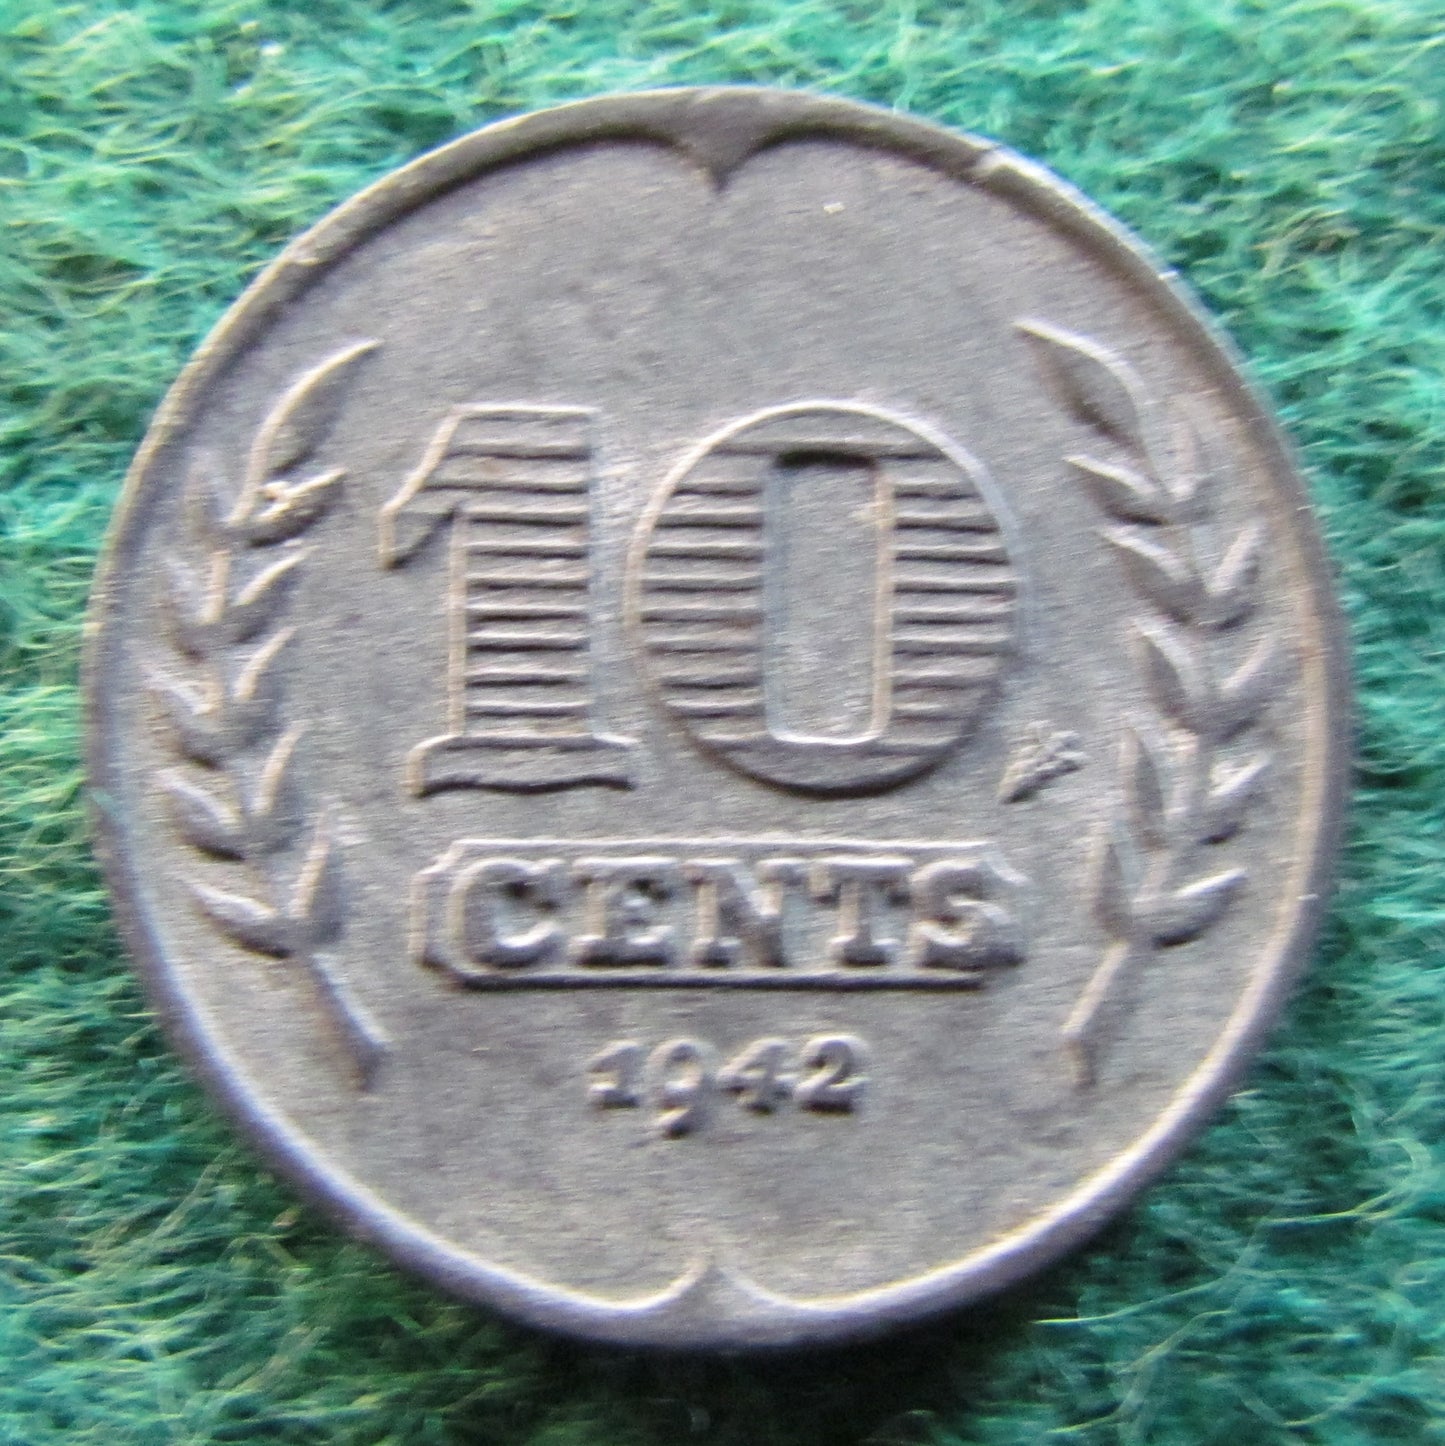 Netherlands 1942 10 Cent Coin - WWII Currency - Circulated